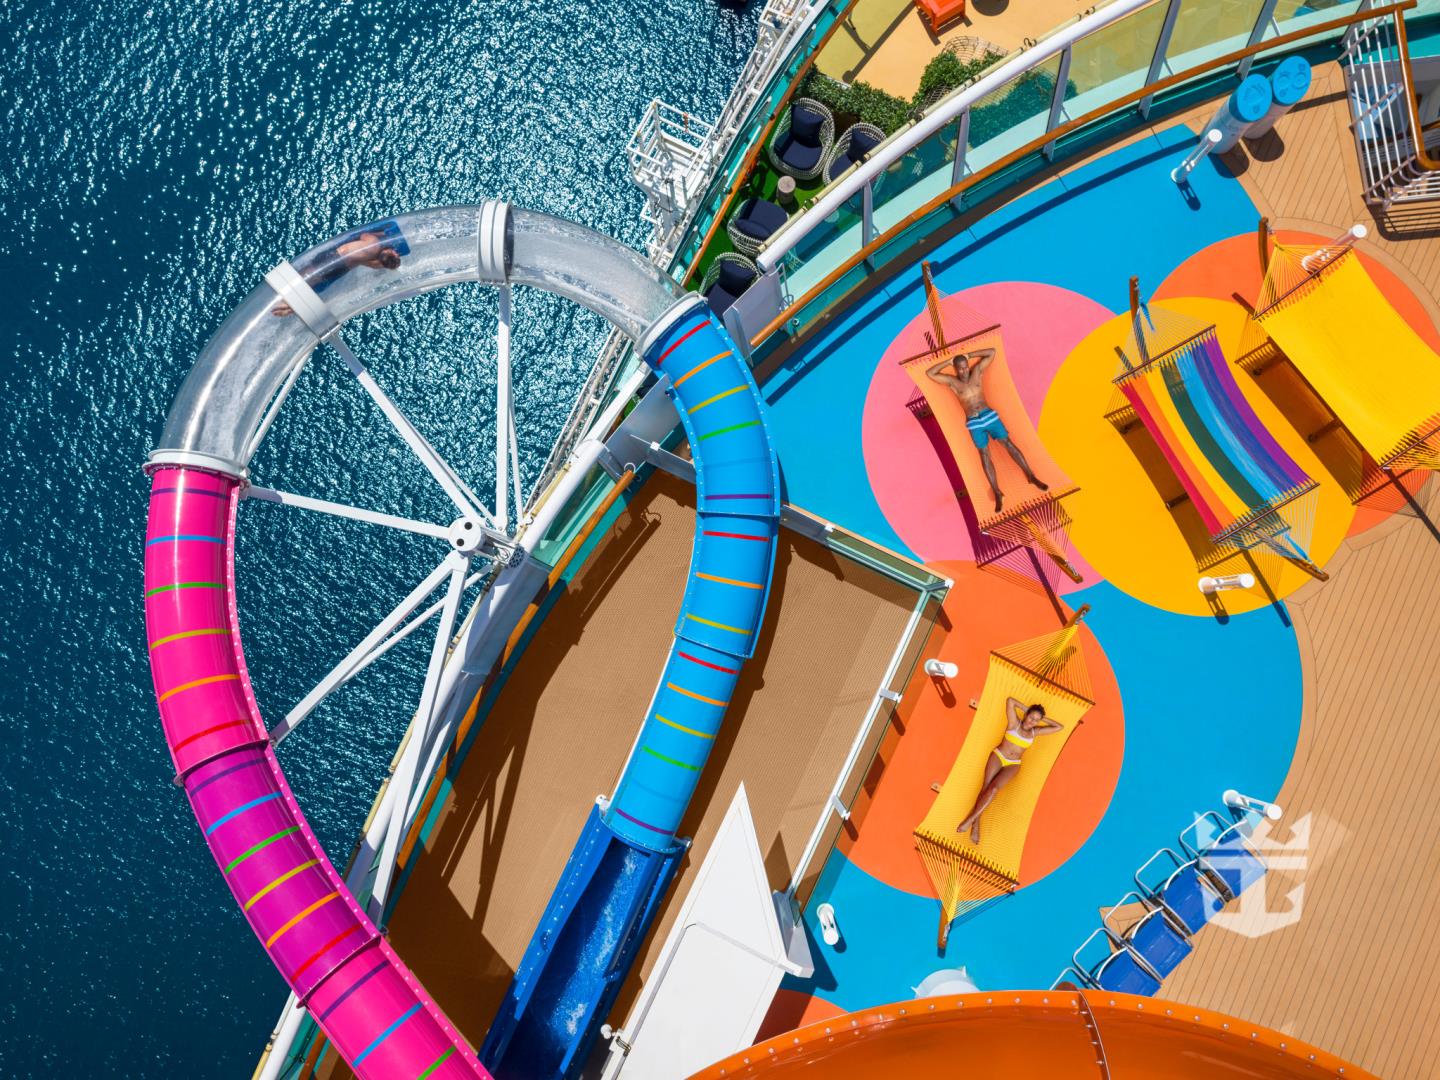 Dramatic shot of Navigator of the Seas with POV from above tubes of Riptide water slide